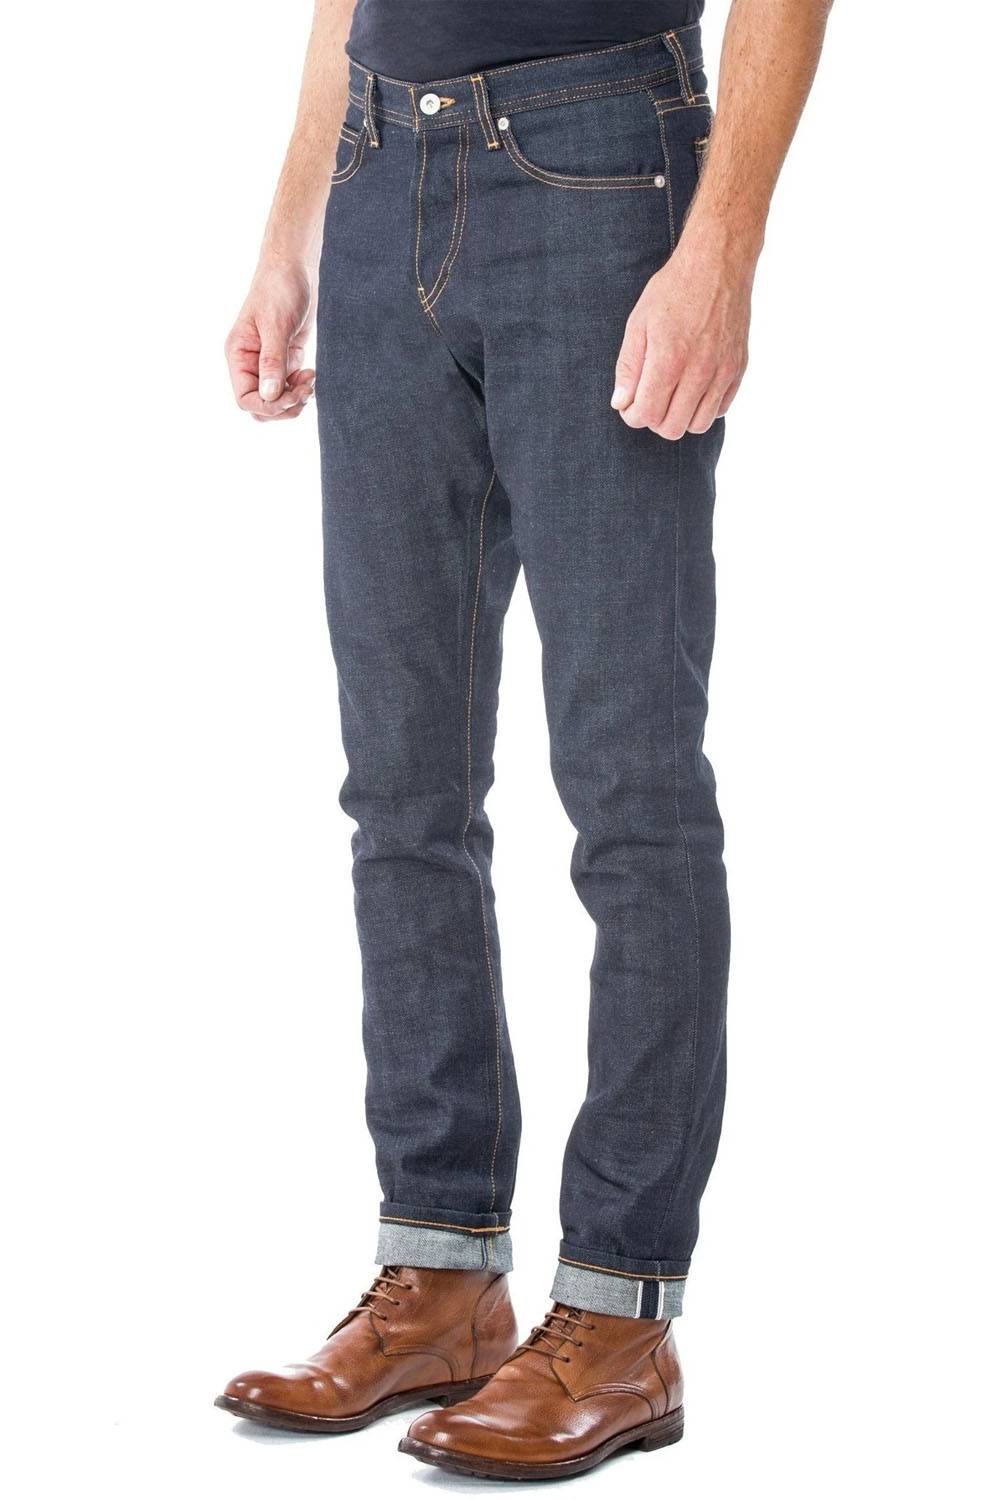 10+ Best Affordable Denim Jeans Made In Canada | Panaprium